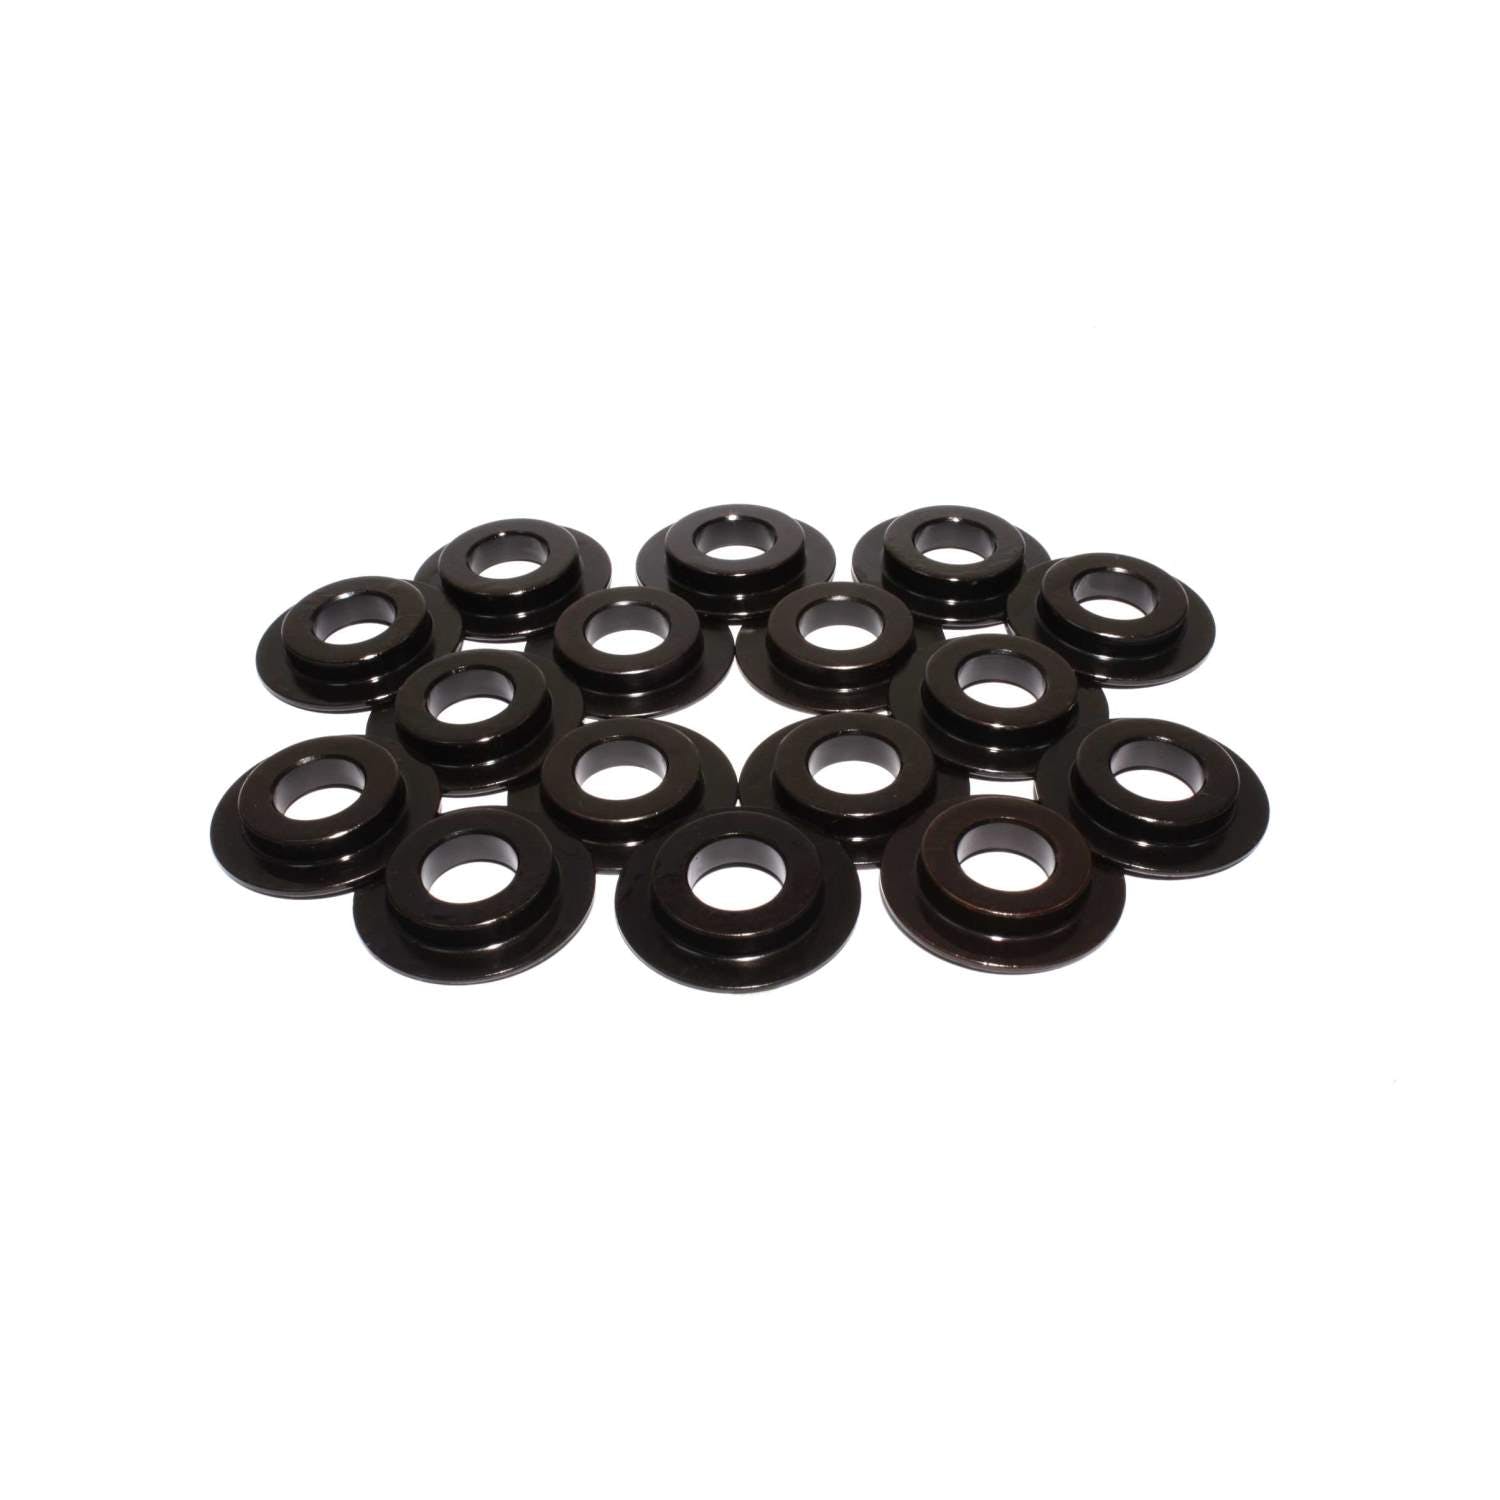 Competition Cams 4667-16 ID Spring Locator Set of 16 - 1.420 inch OD, .530 inch ID, .060 inch Thickness